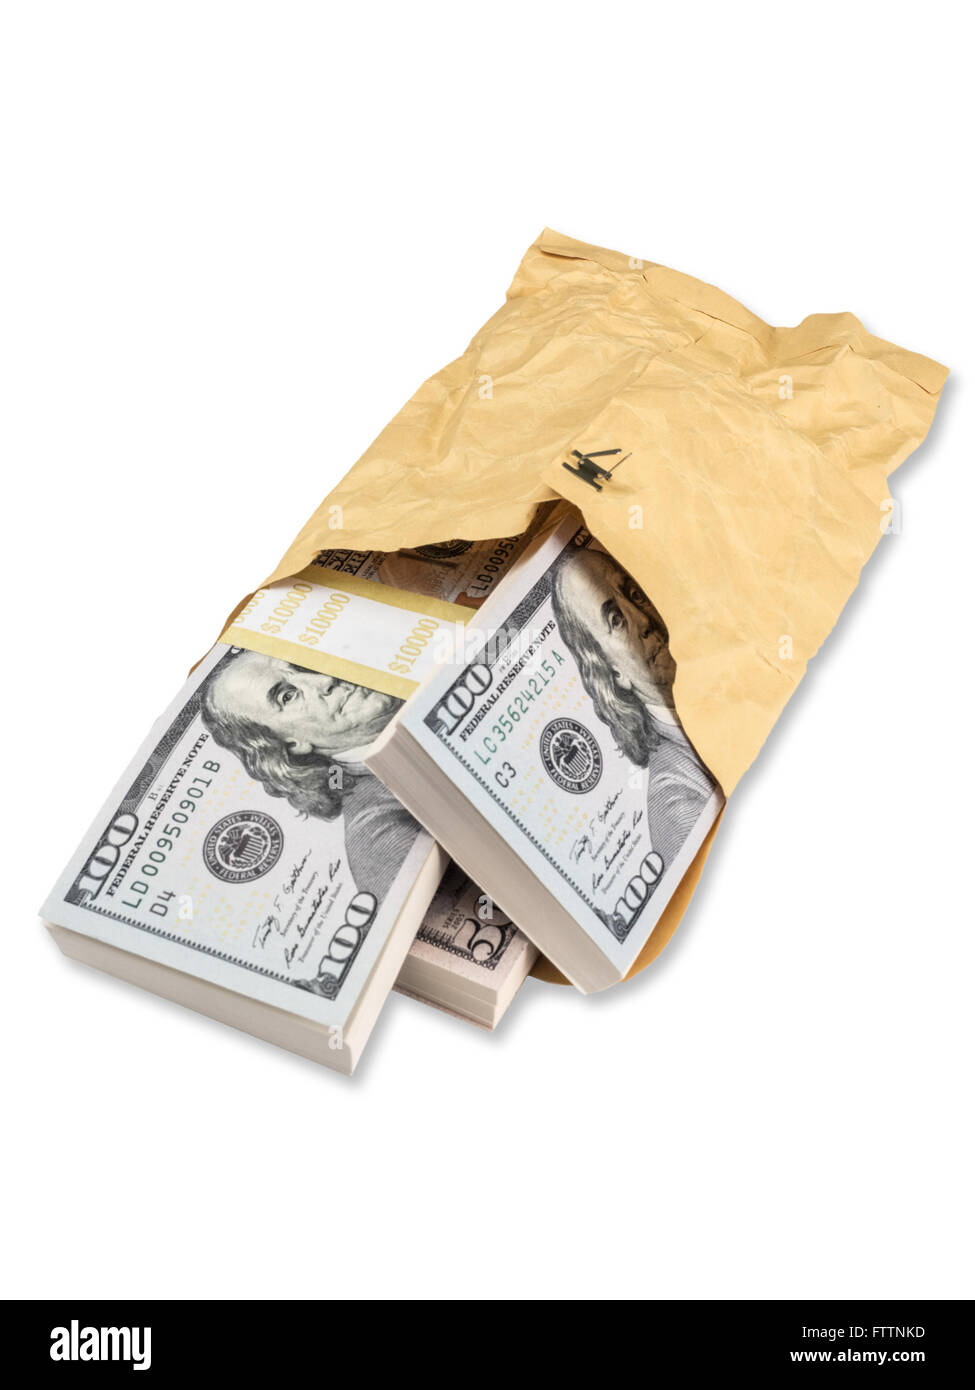 Photograph of large amount of crisp U.S. paper currency stuffed into a wrinkled brown envelope, suggesting an illicit transactio Stock Photo